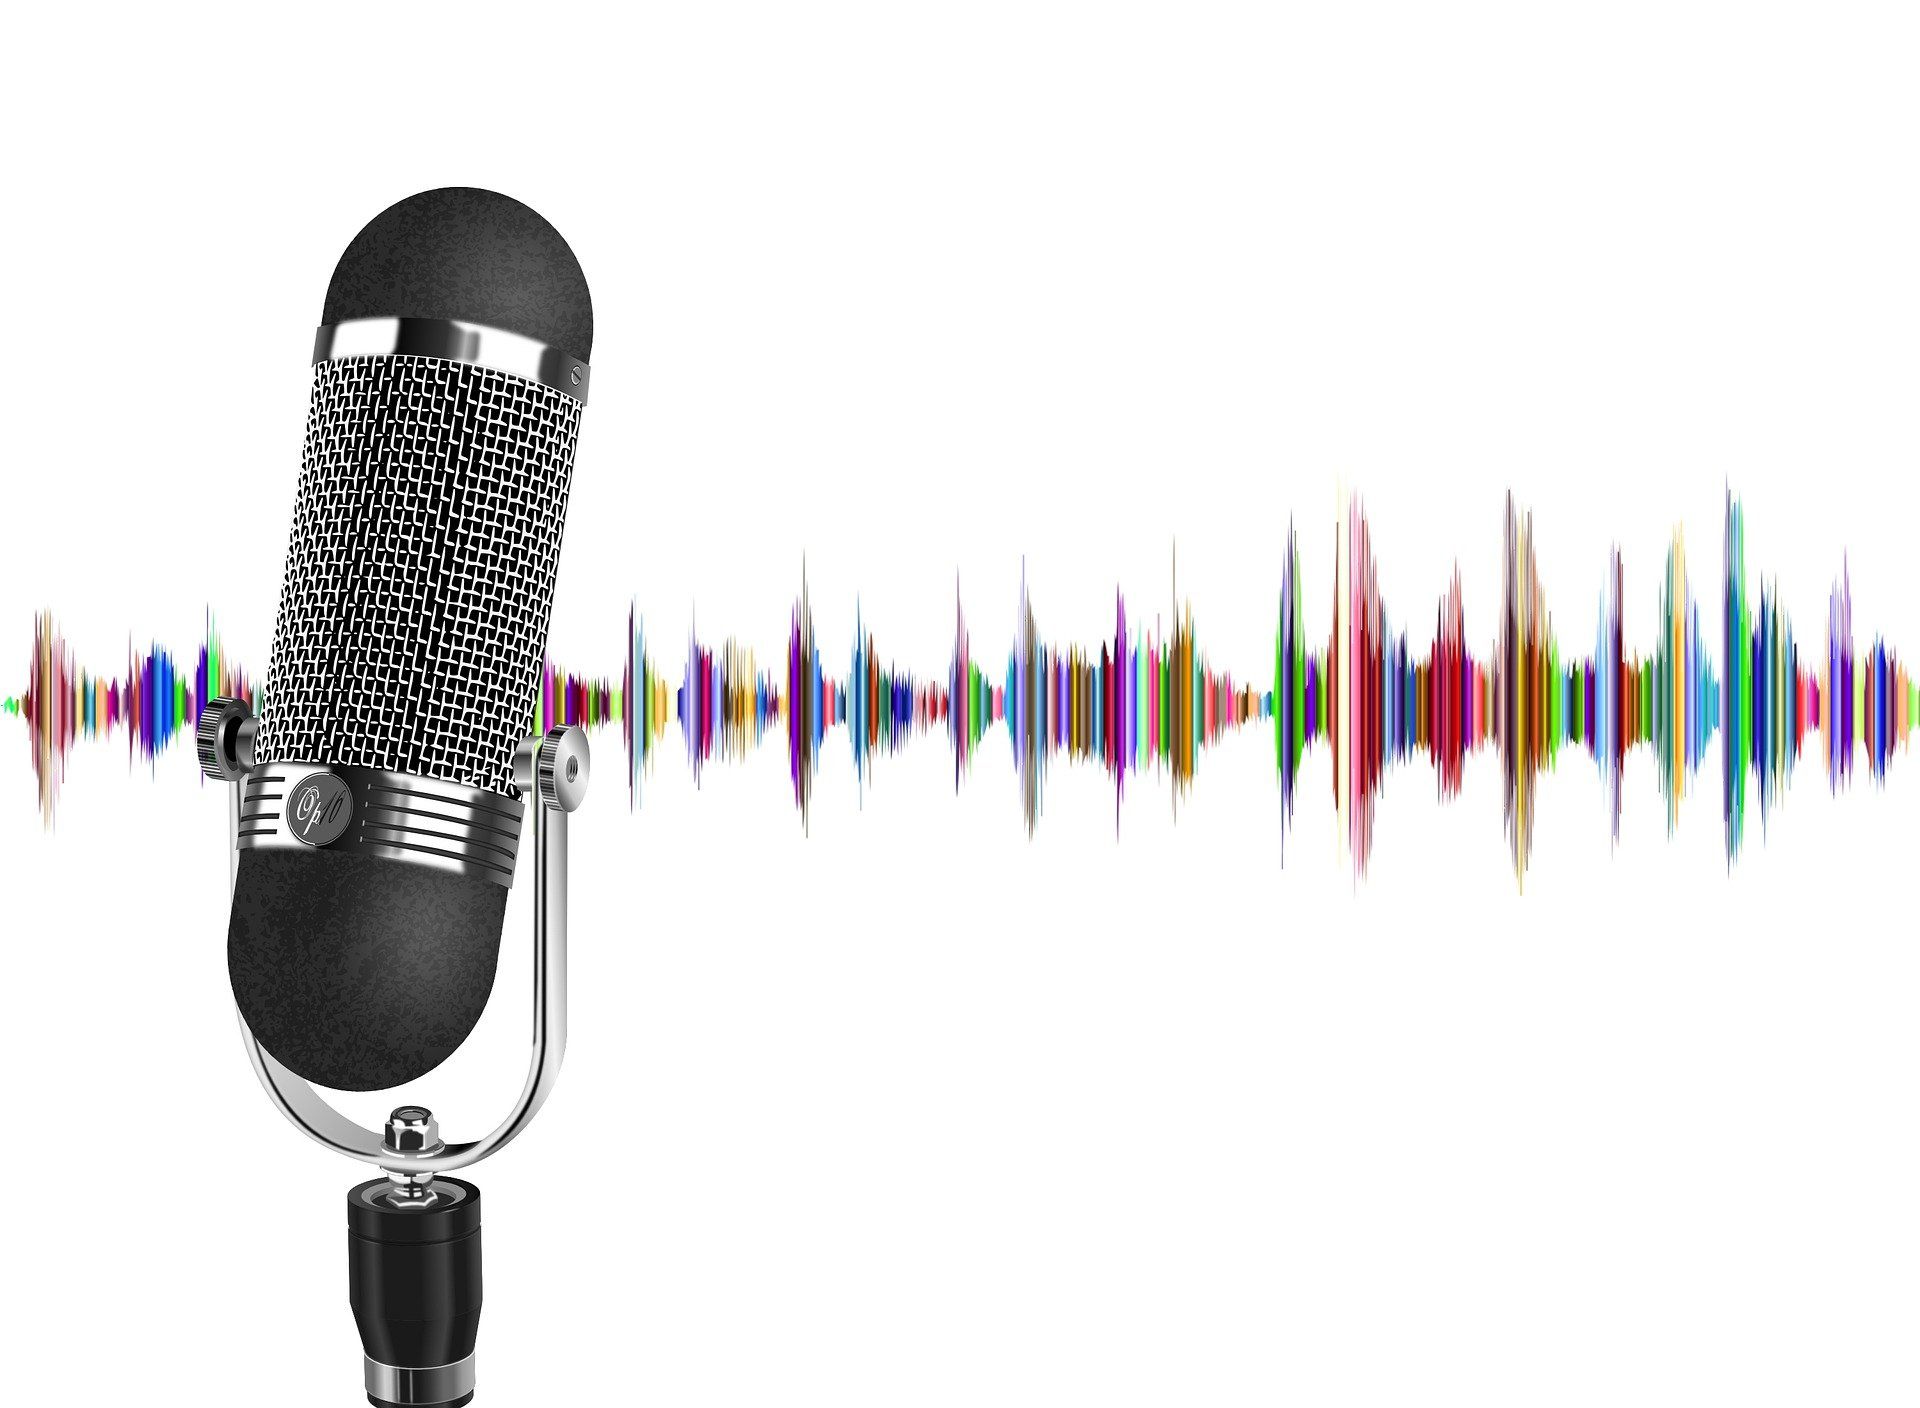 A microphone with an audio wave